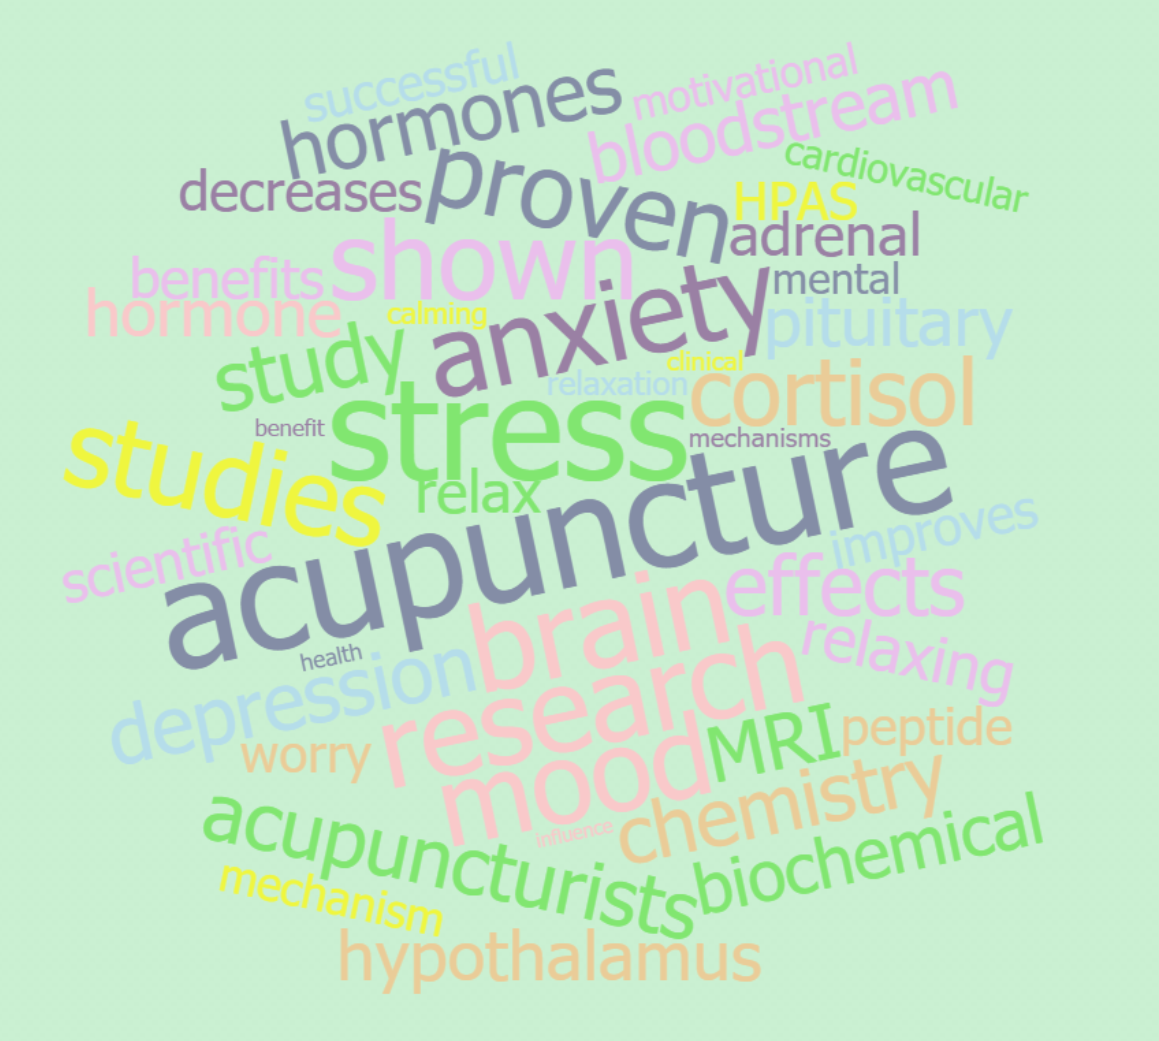 acupuncture and depression research